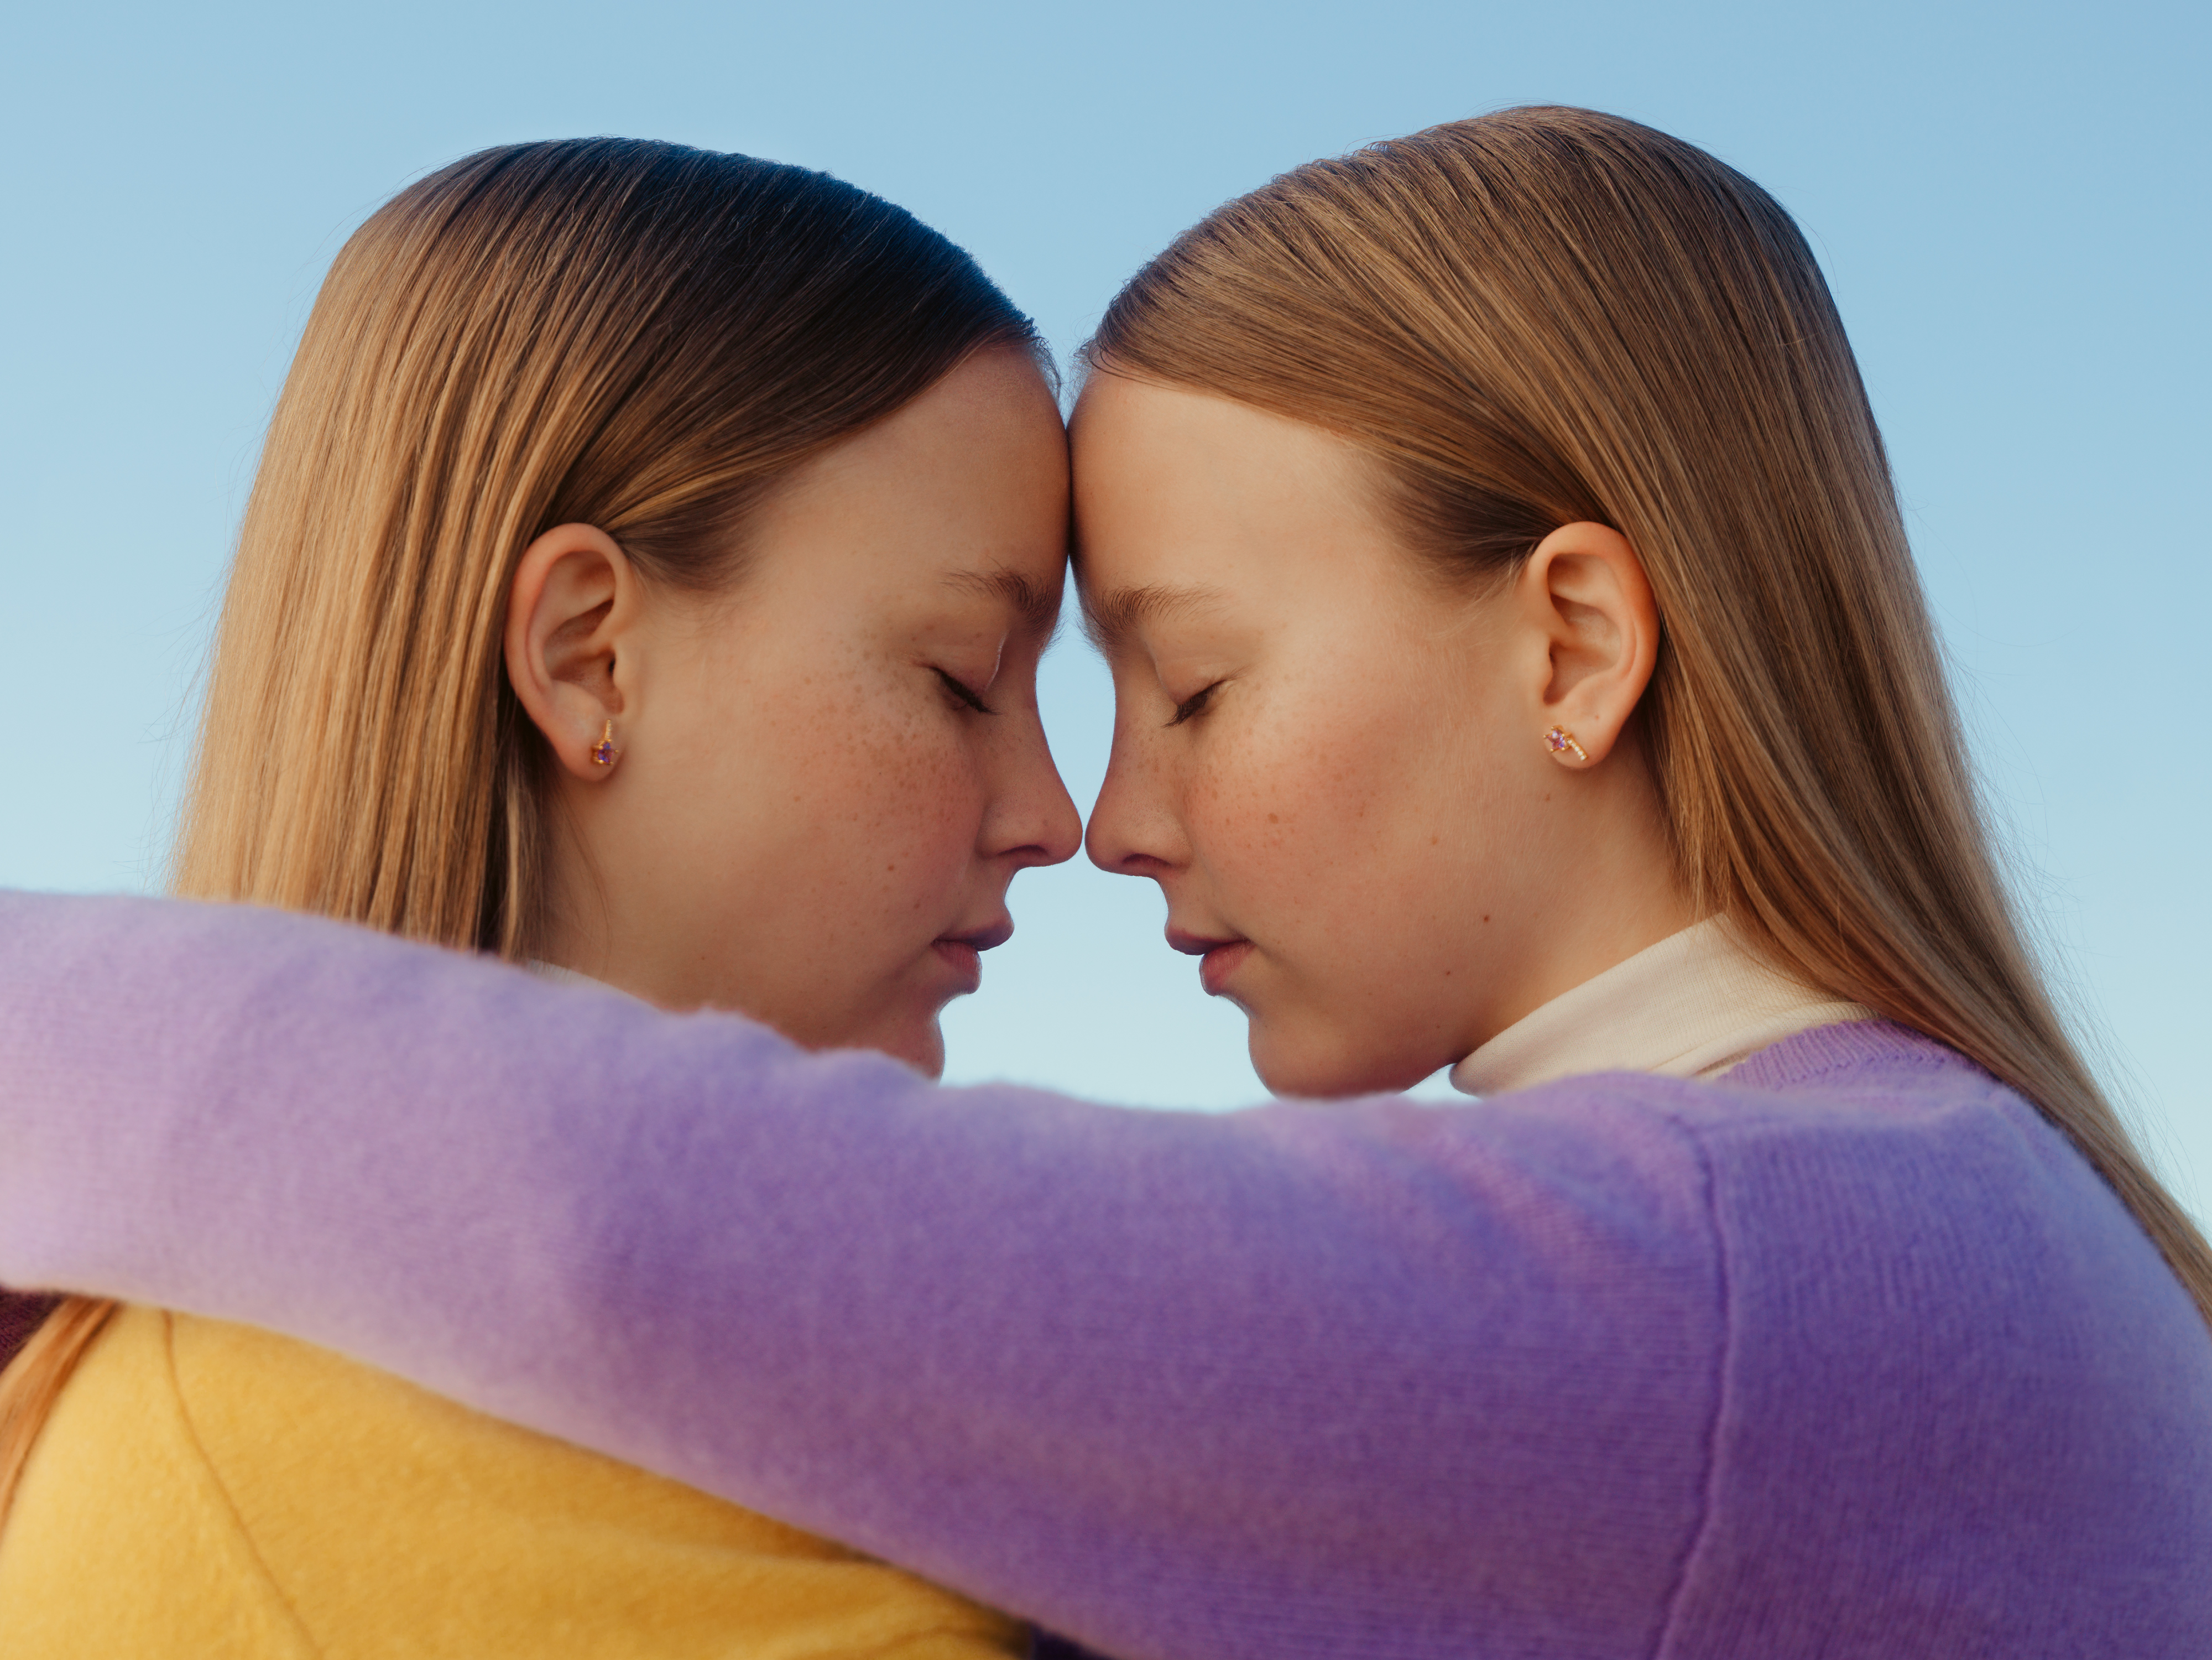 Image of two young women in orange and purple sweaters from the side. They hold their heads together and their foreheads are touching.